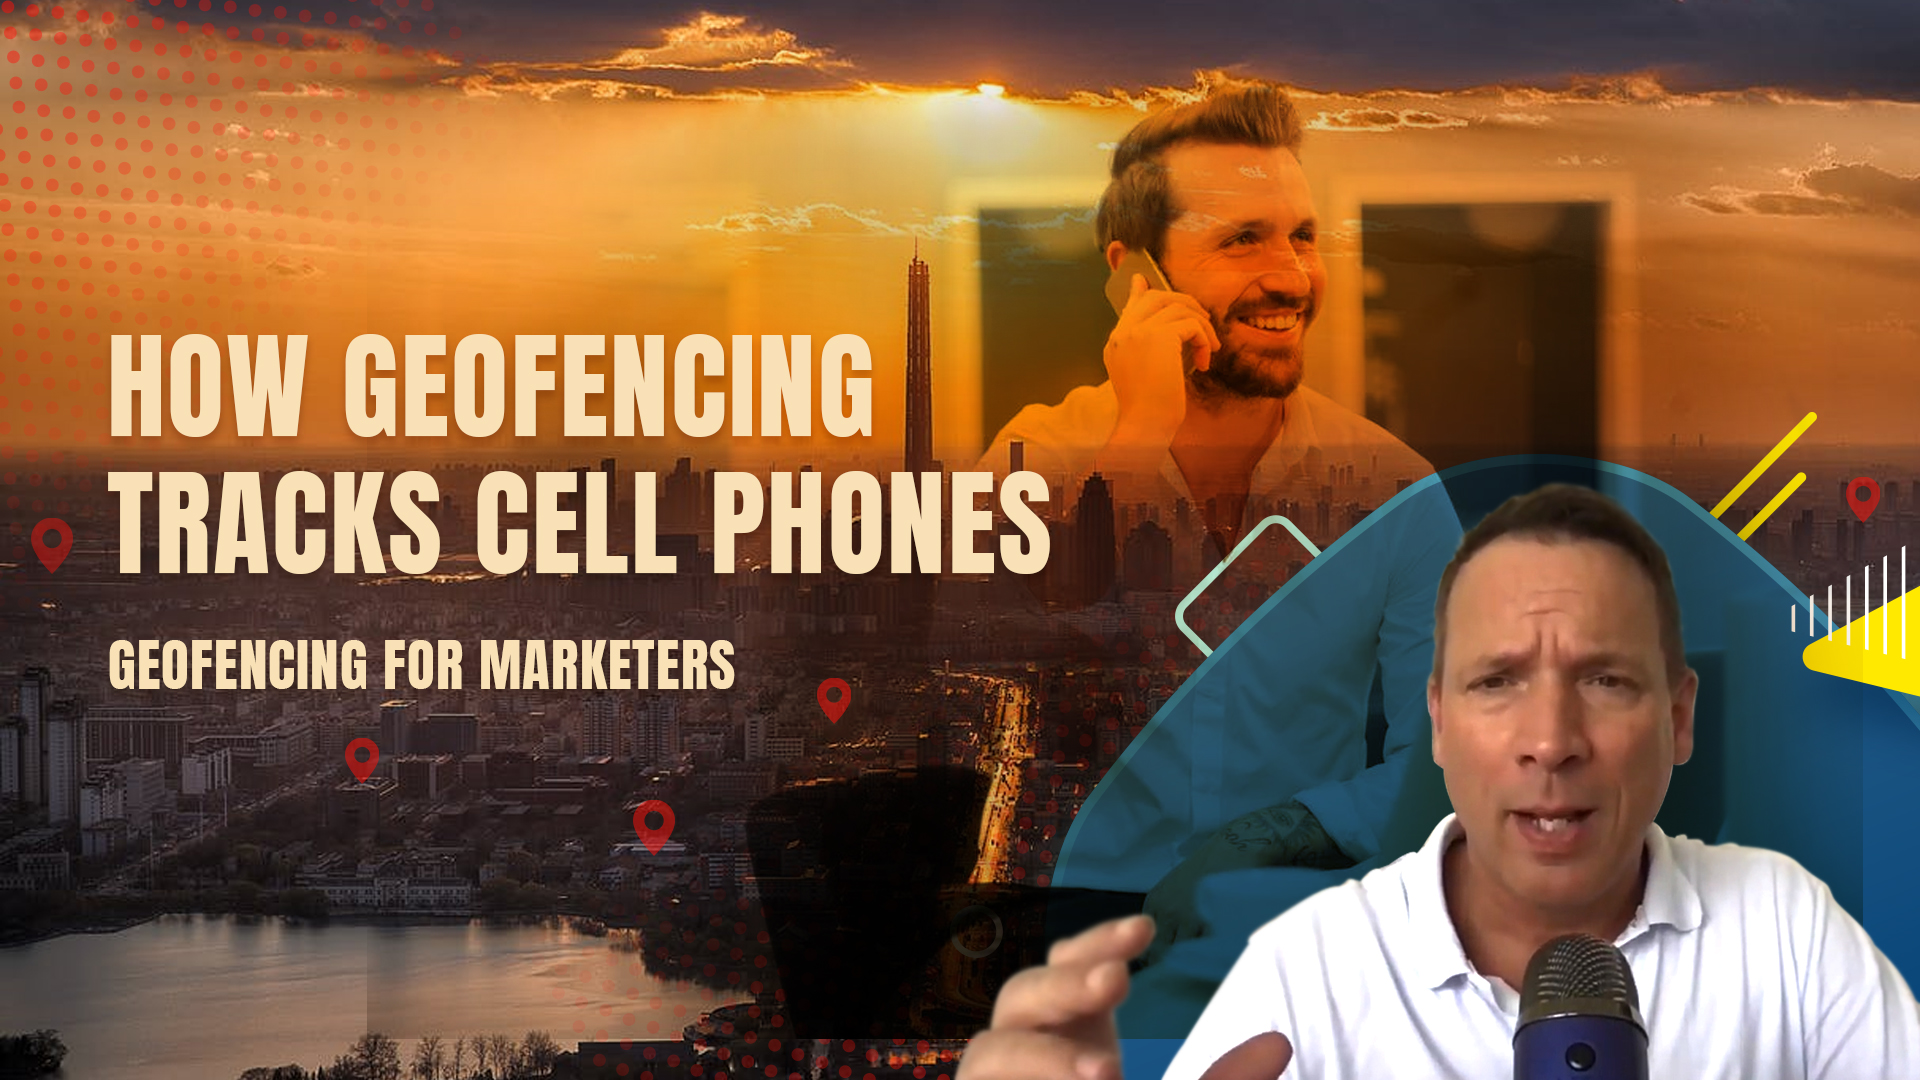 GEOFENCING FOR MARKETERS